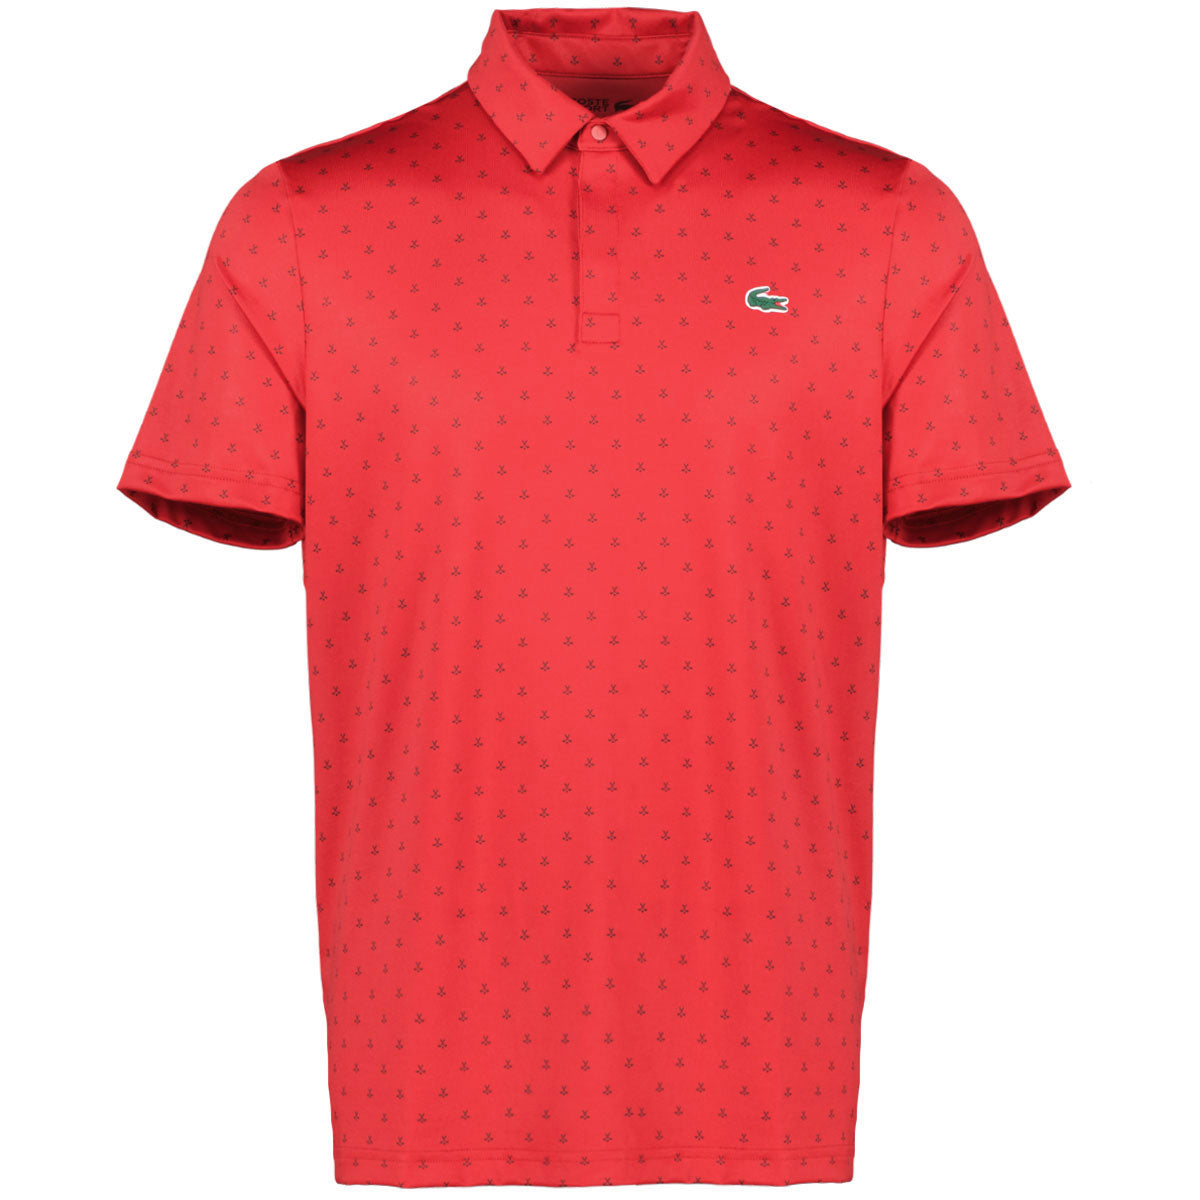 Lacoste All Over Printed Polo Shirt DH5175